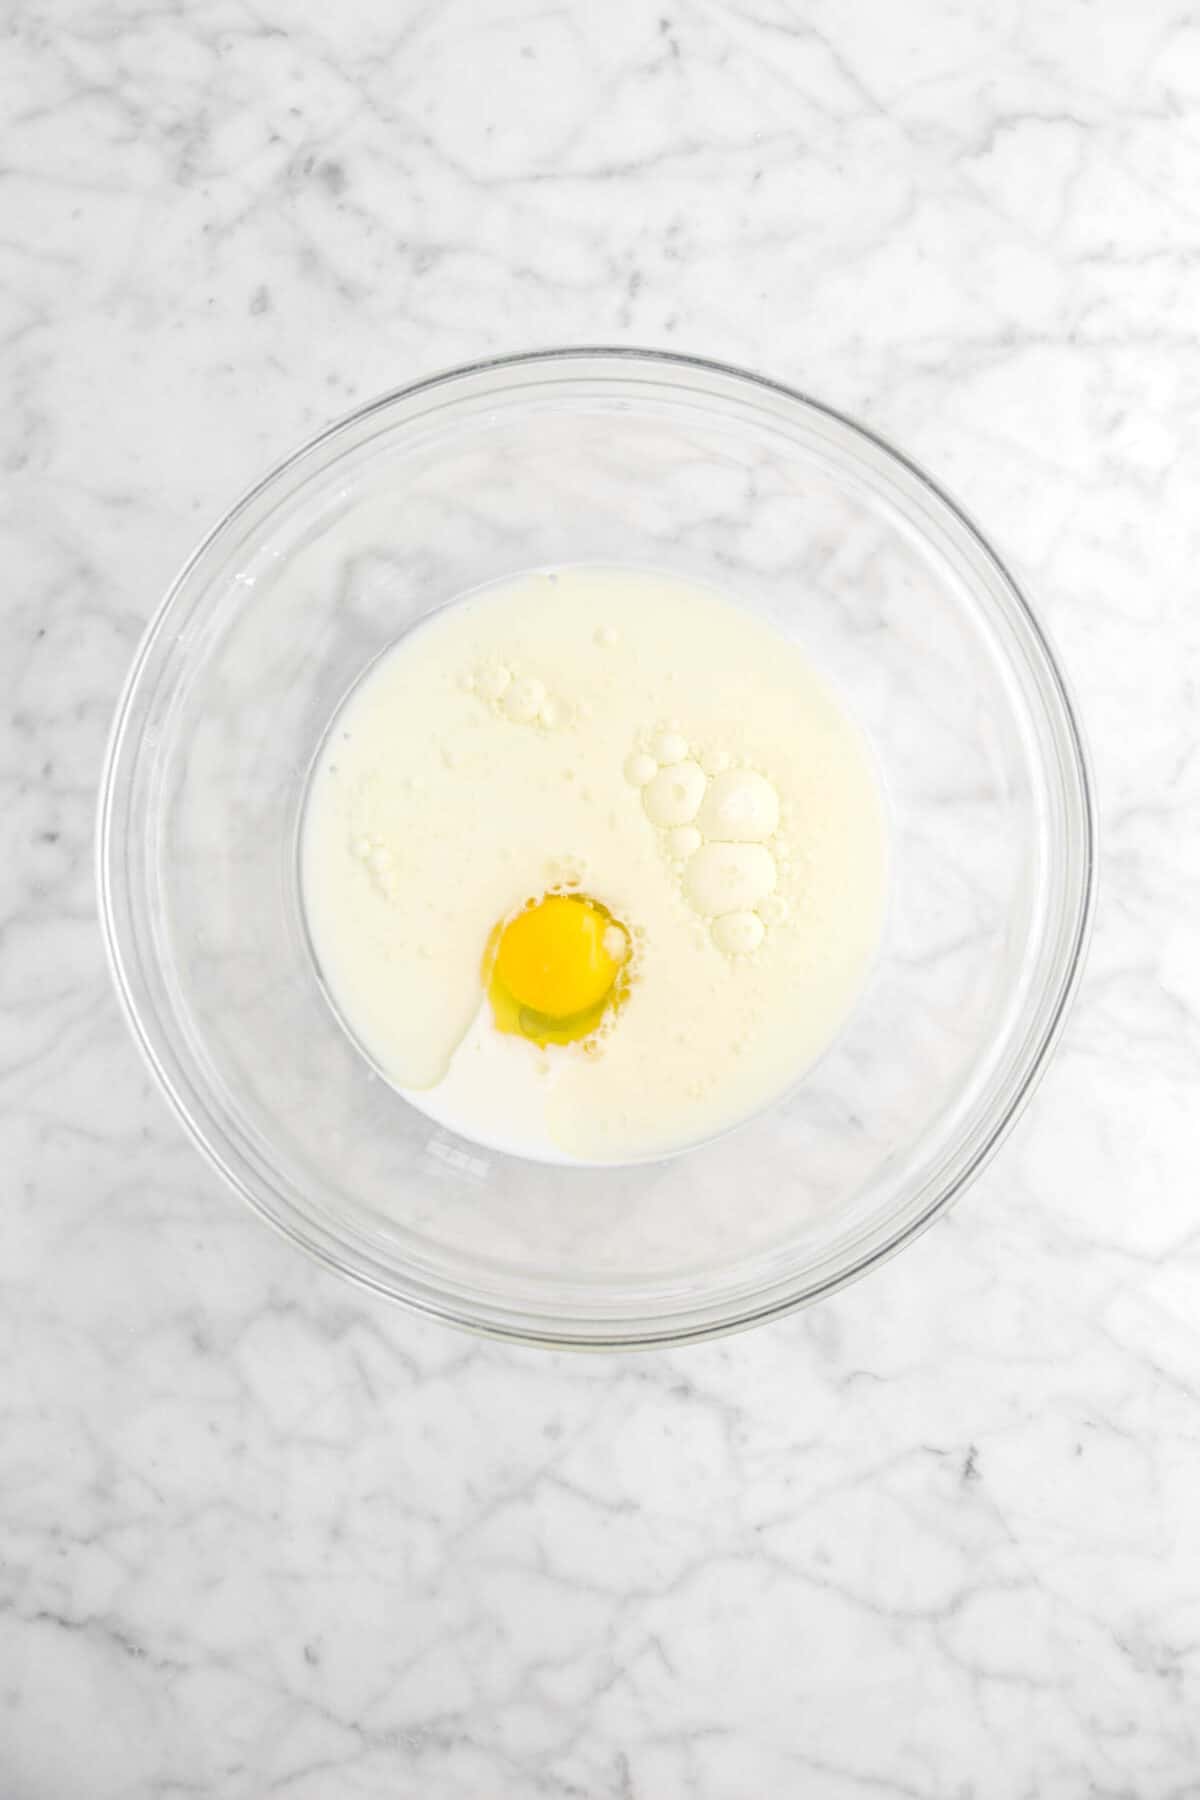 milk, oil, and egg in glass bowl